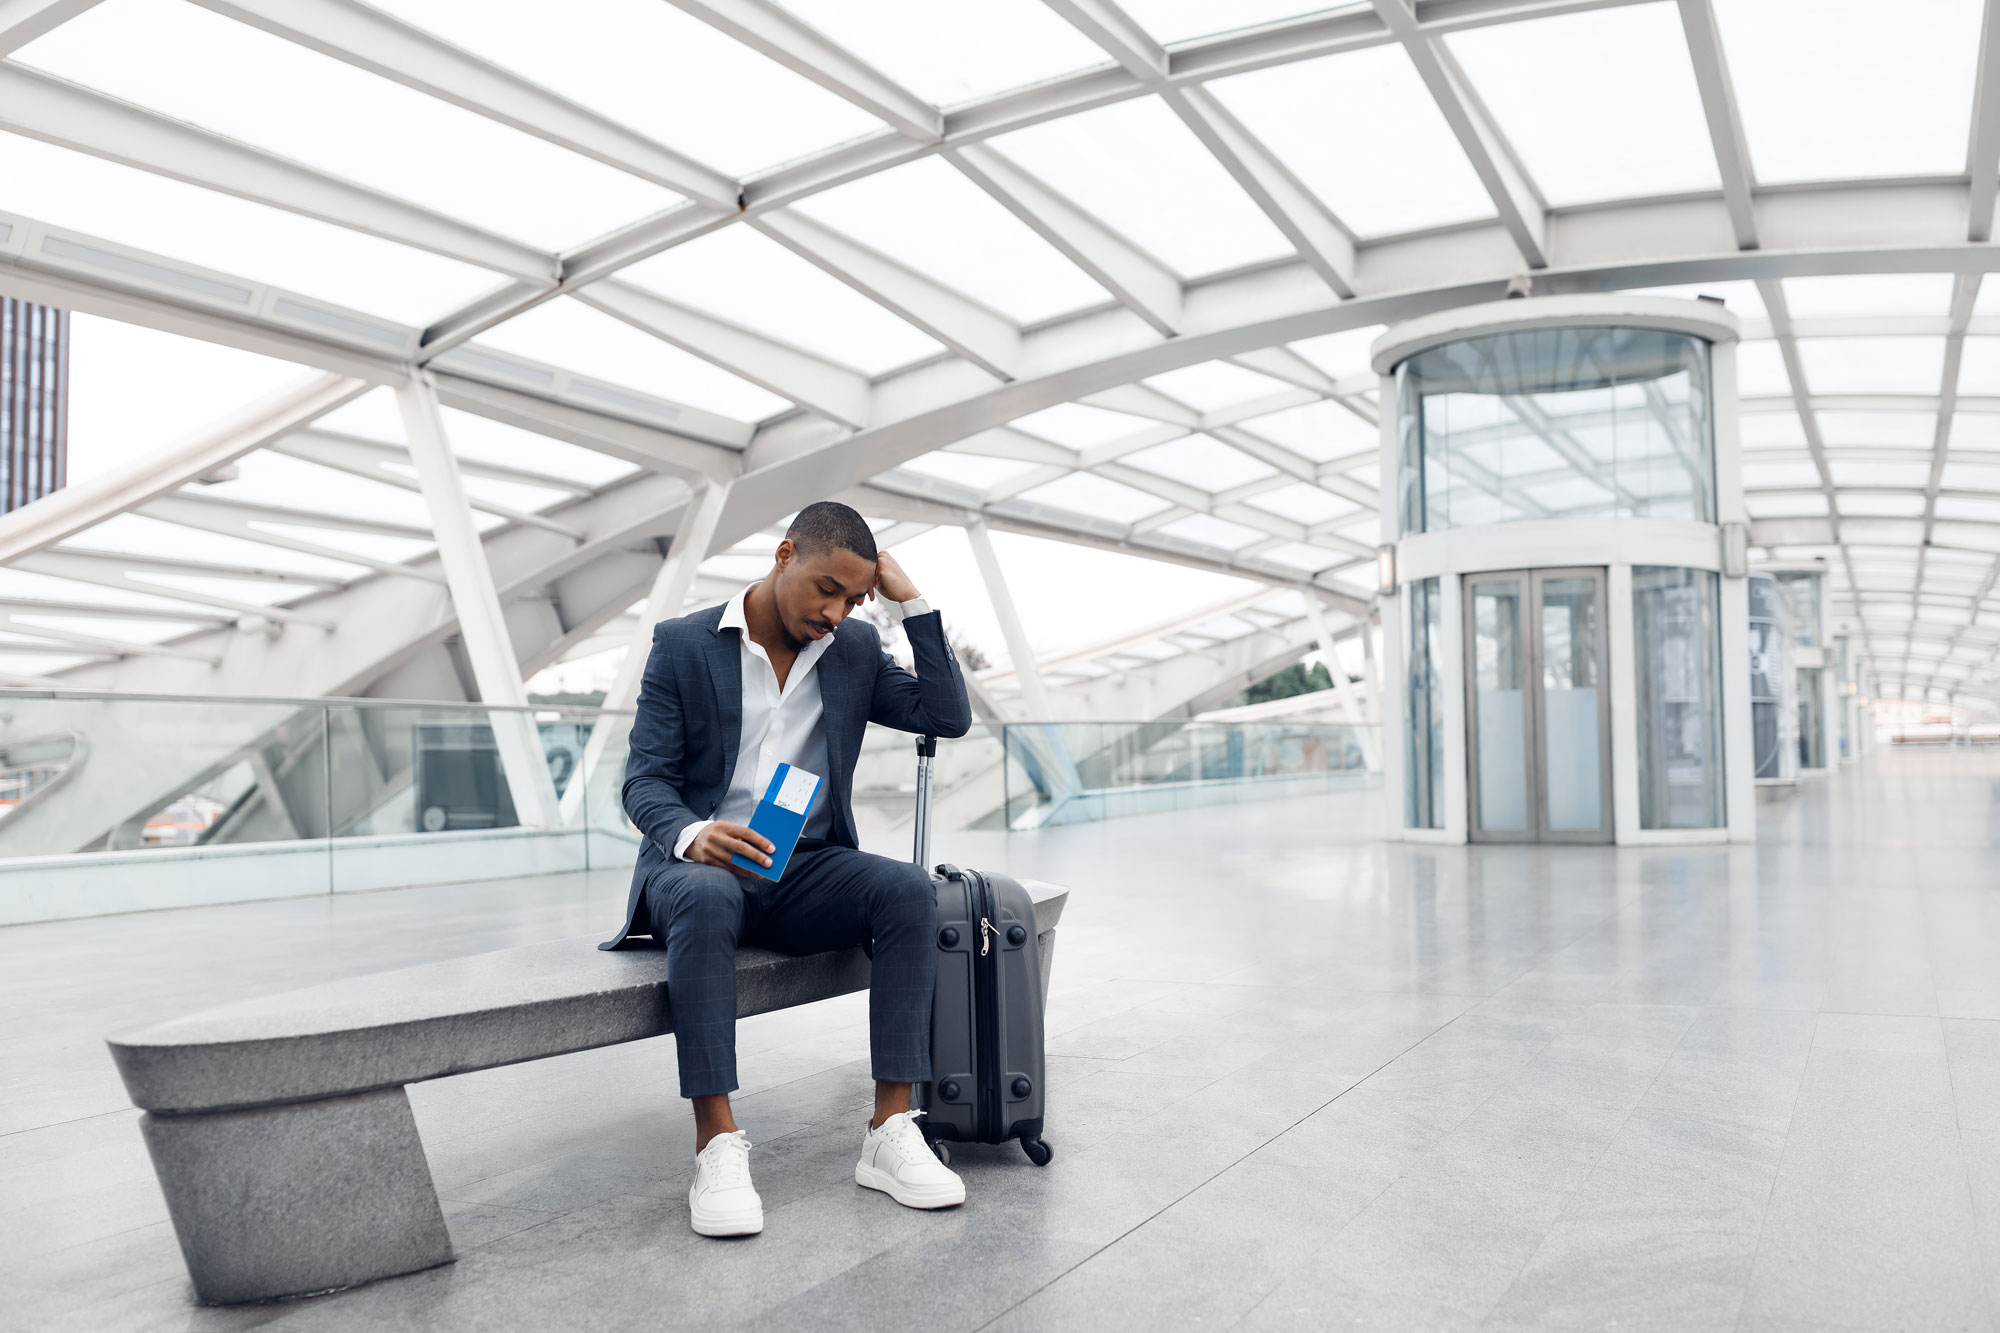 Businessman Sitting With Suitcase At Airport Terminal after a canceled flight who wishes he had purchased travel insurance for flight cancellations.